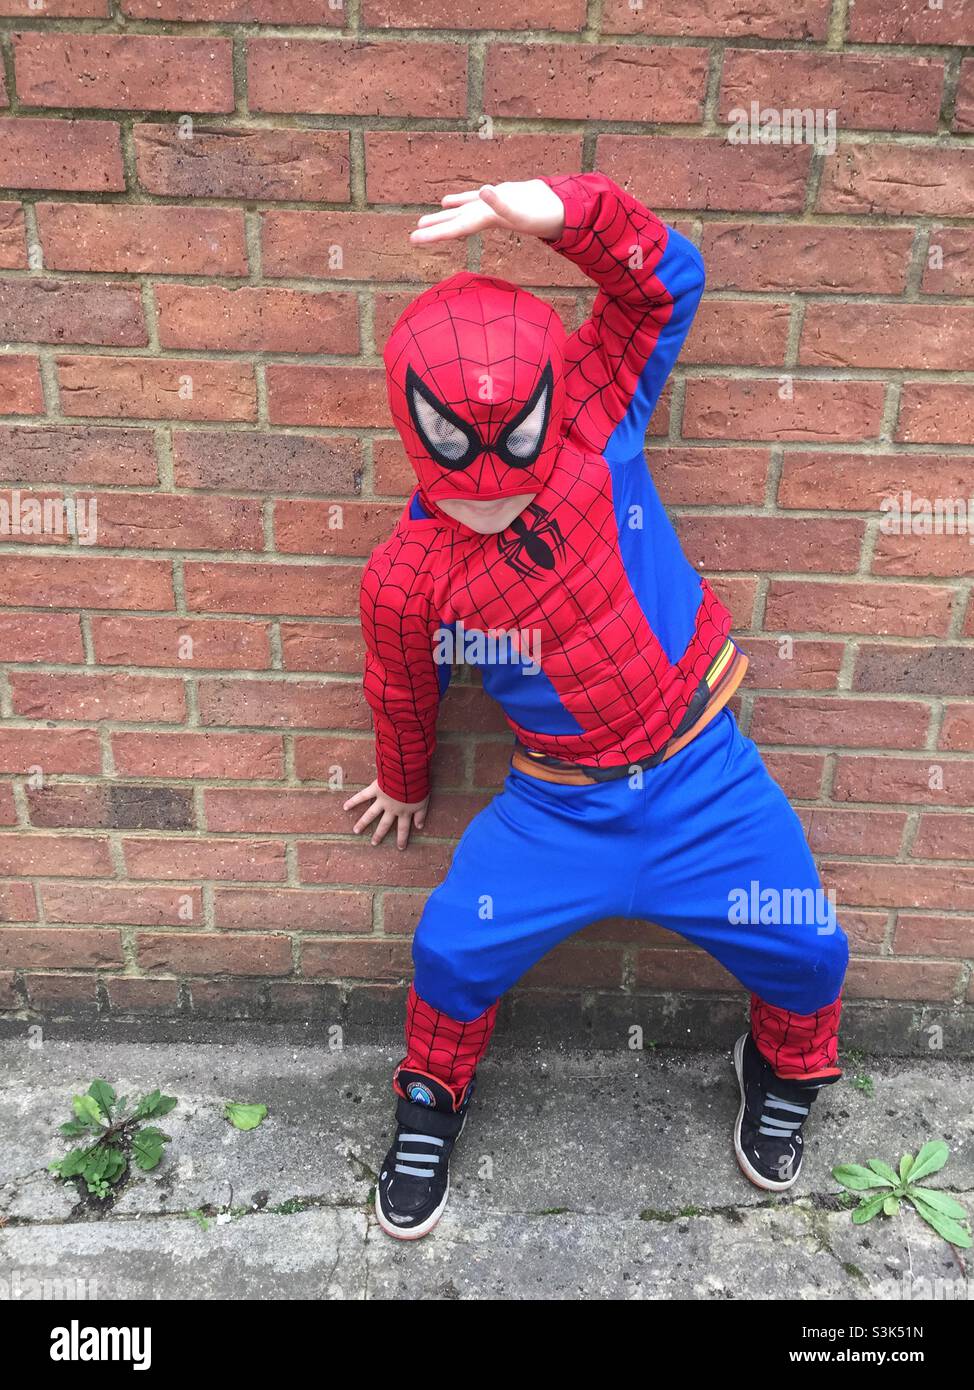 Young boy dressed as spider man and posing Stock Photo